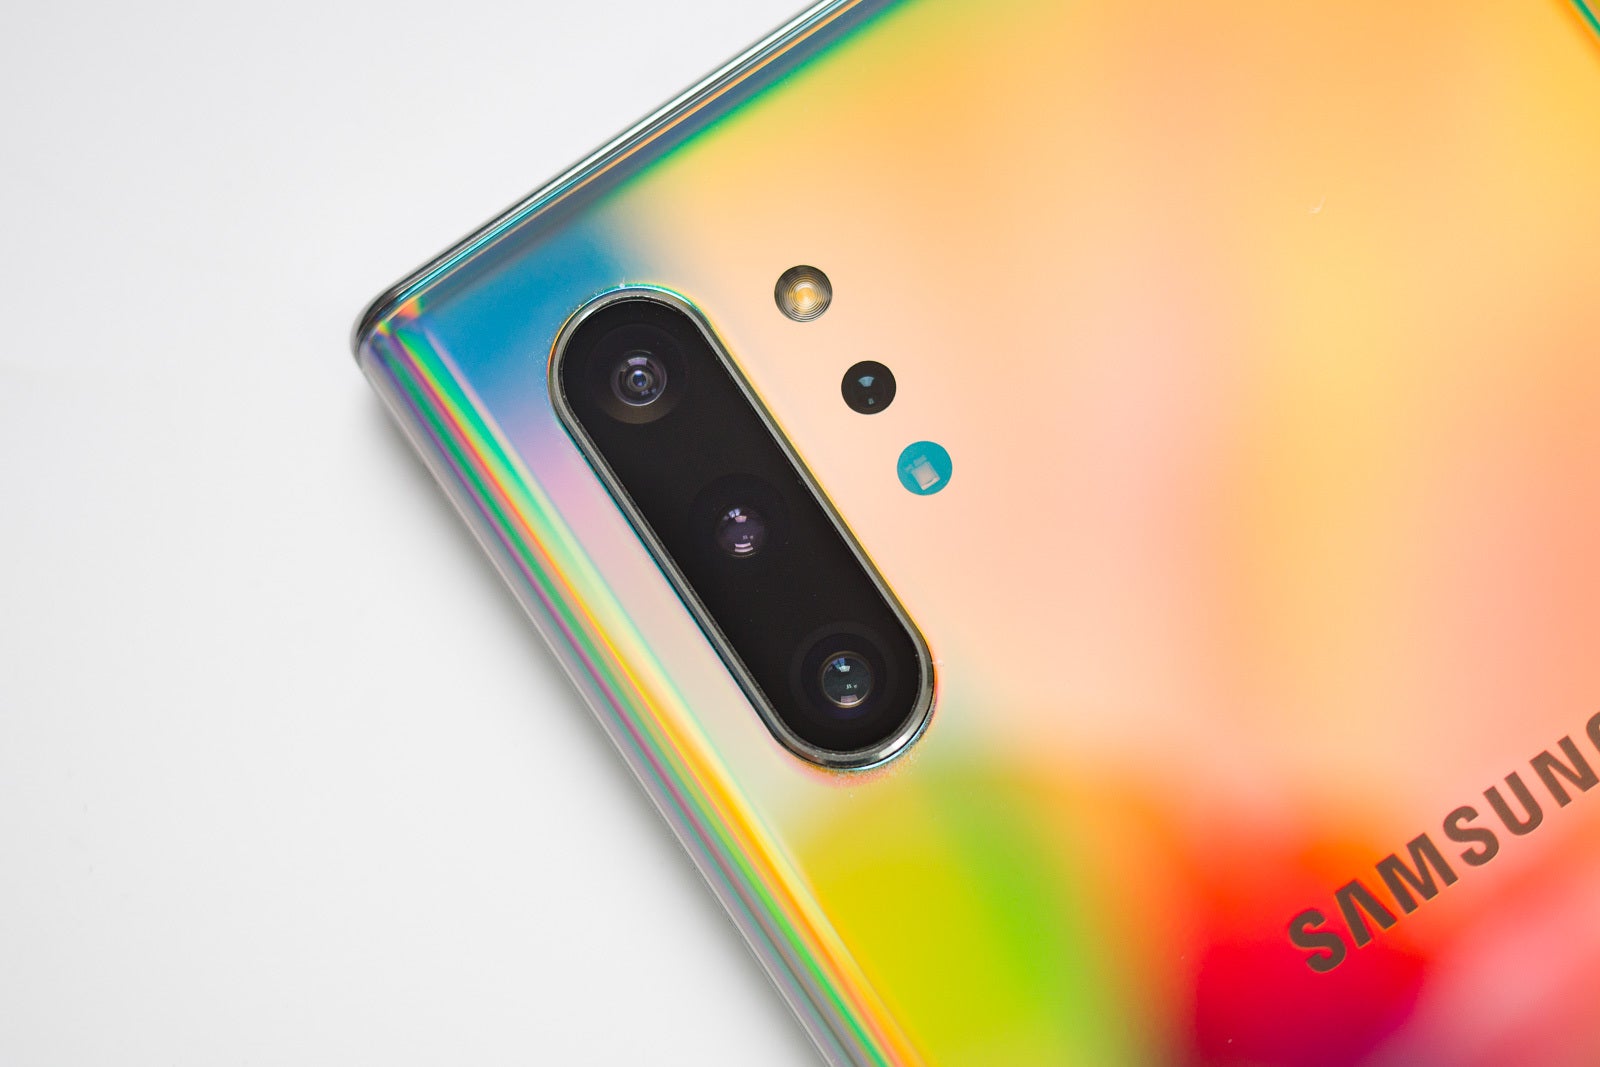 Expect four cameras - Huge Galaxy S11 camera upgrades could include 5x optical zoom